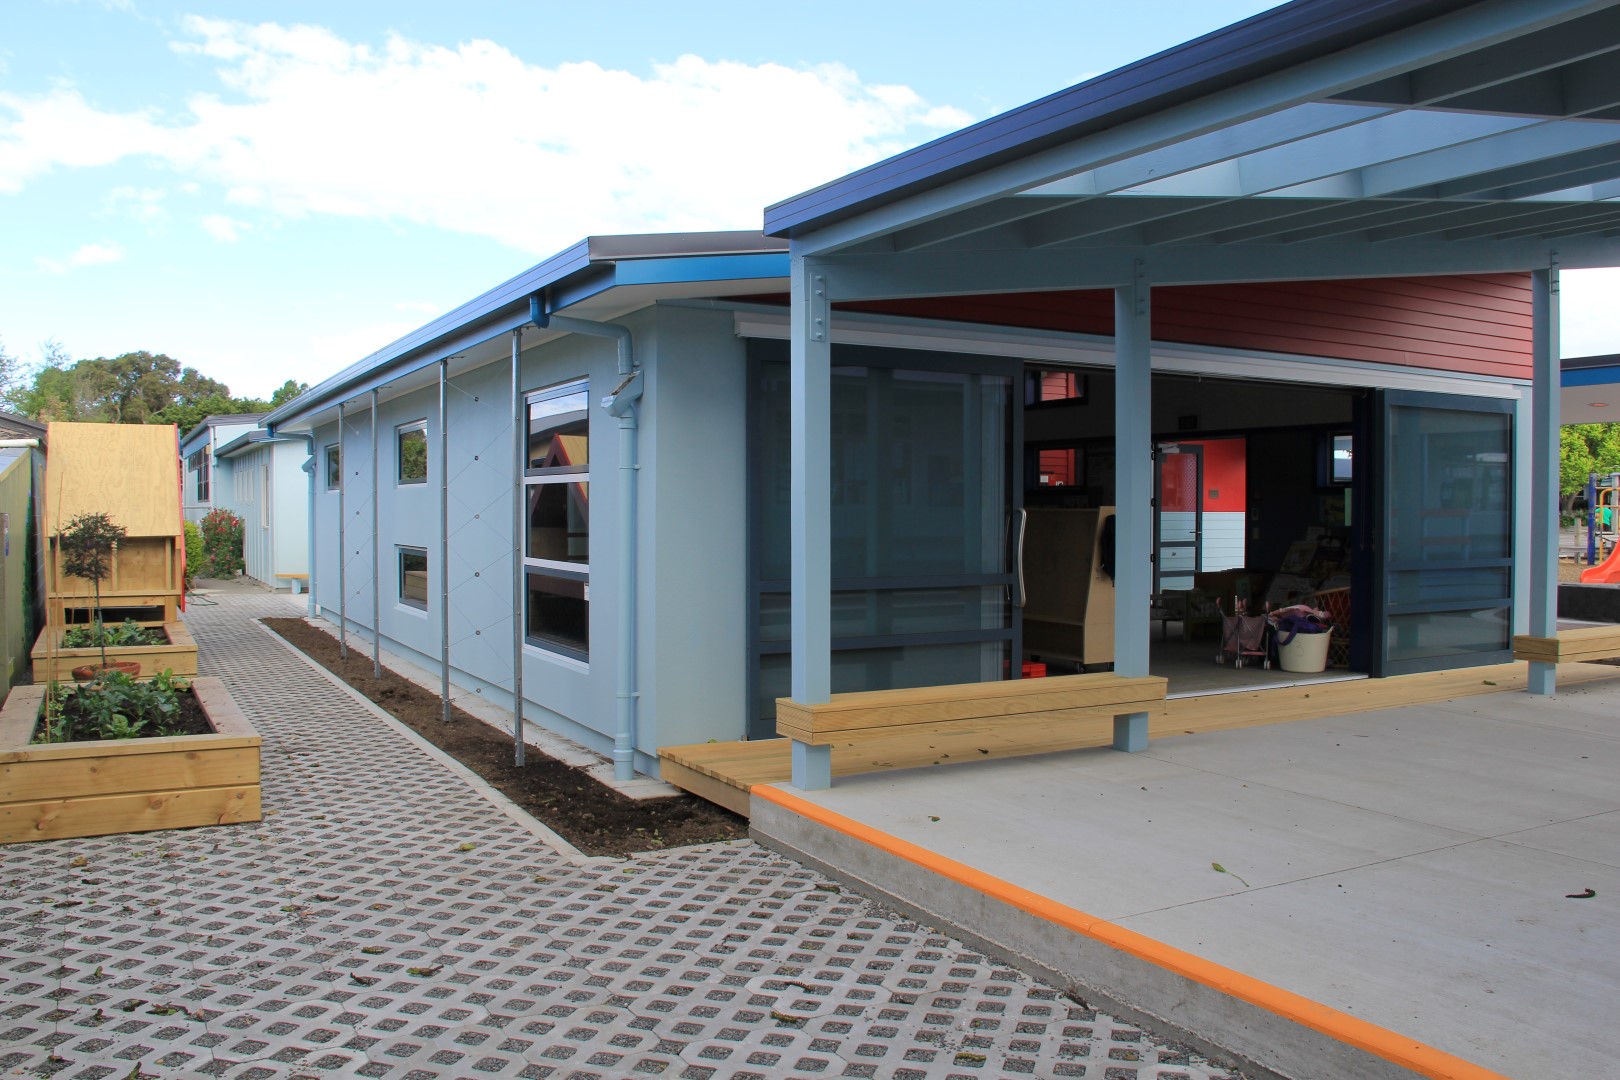 Taradale Primary School New Learning Centre